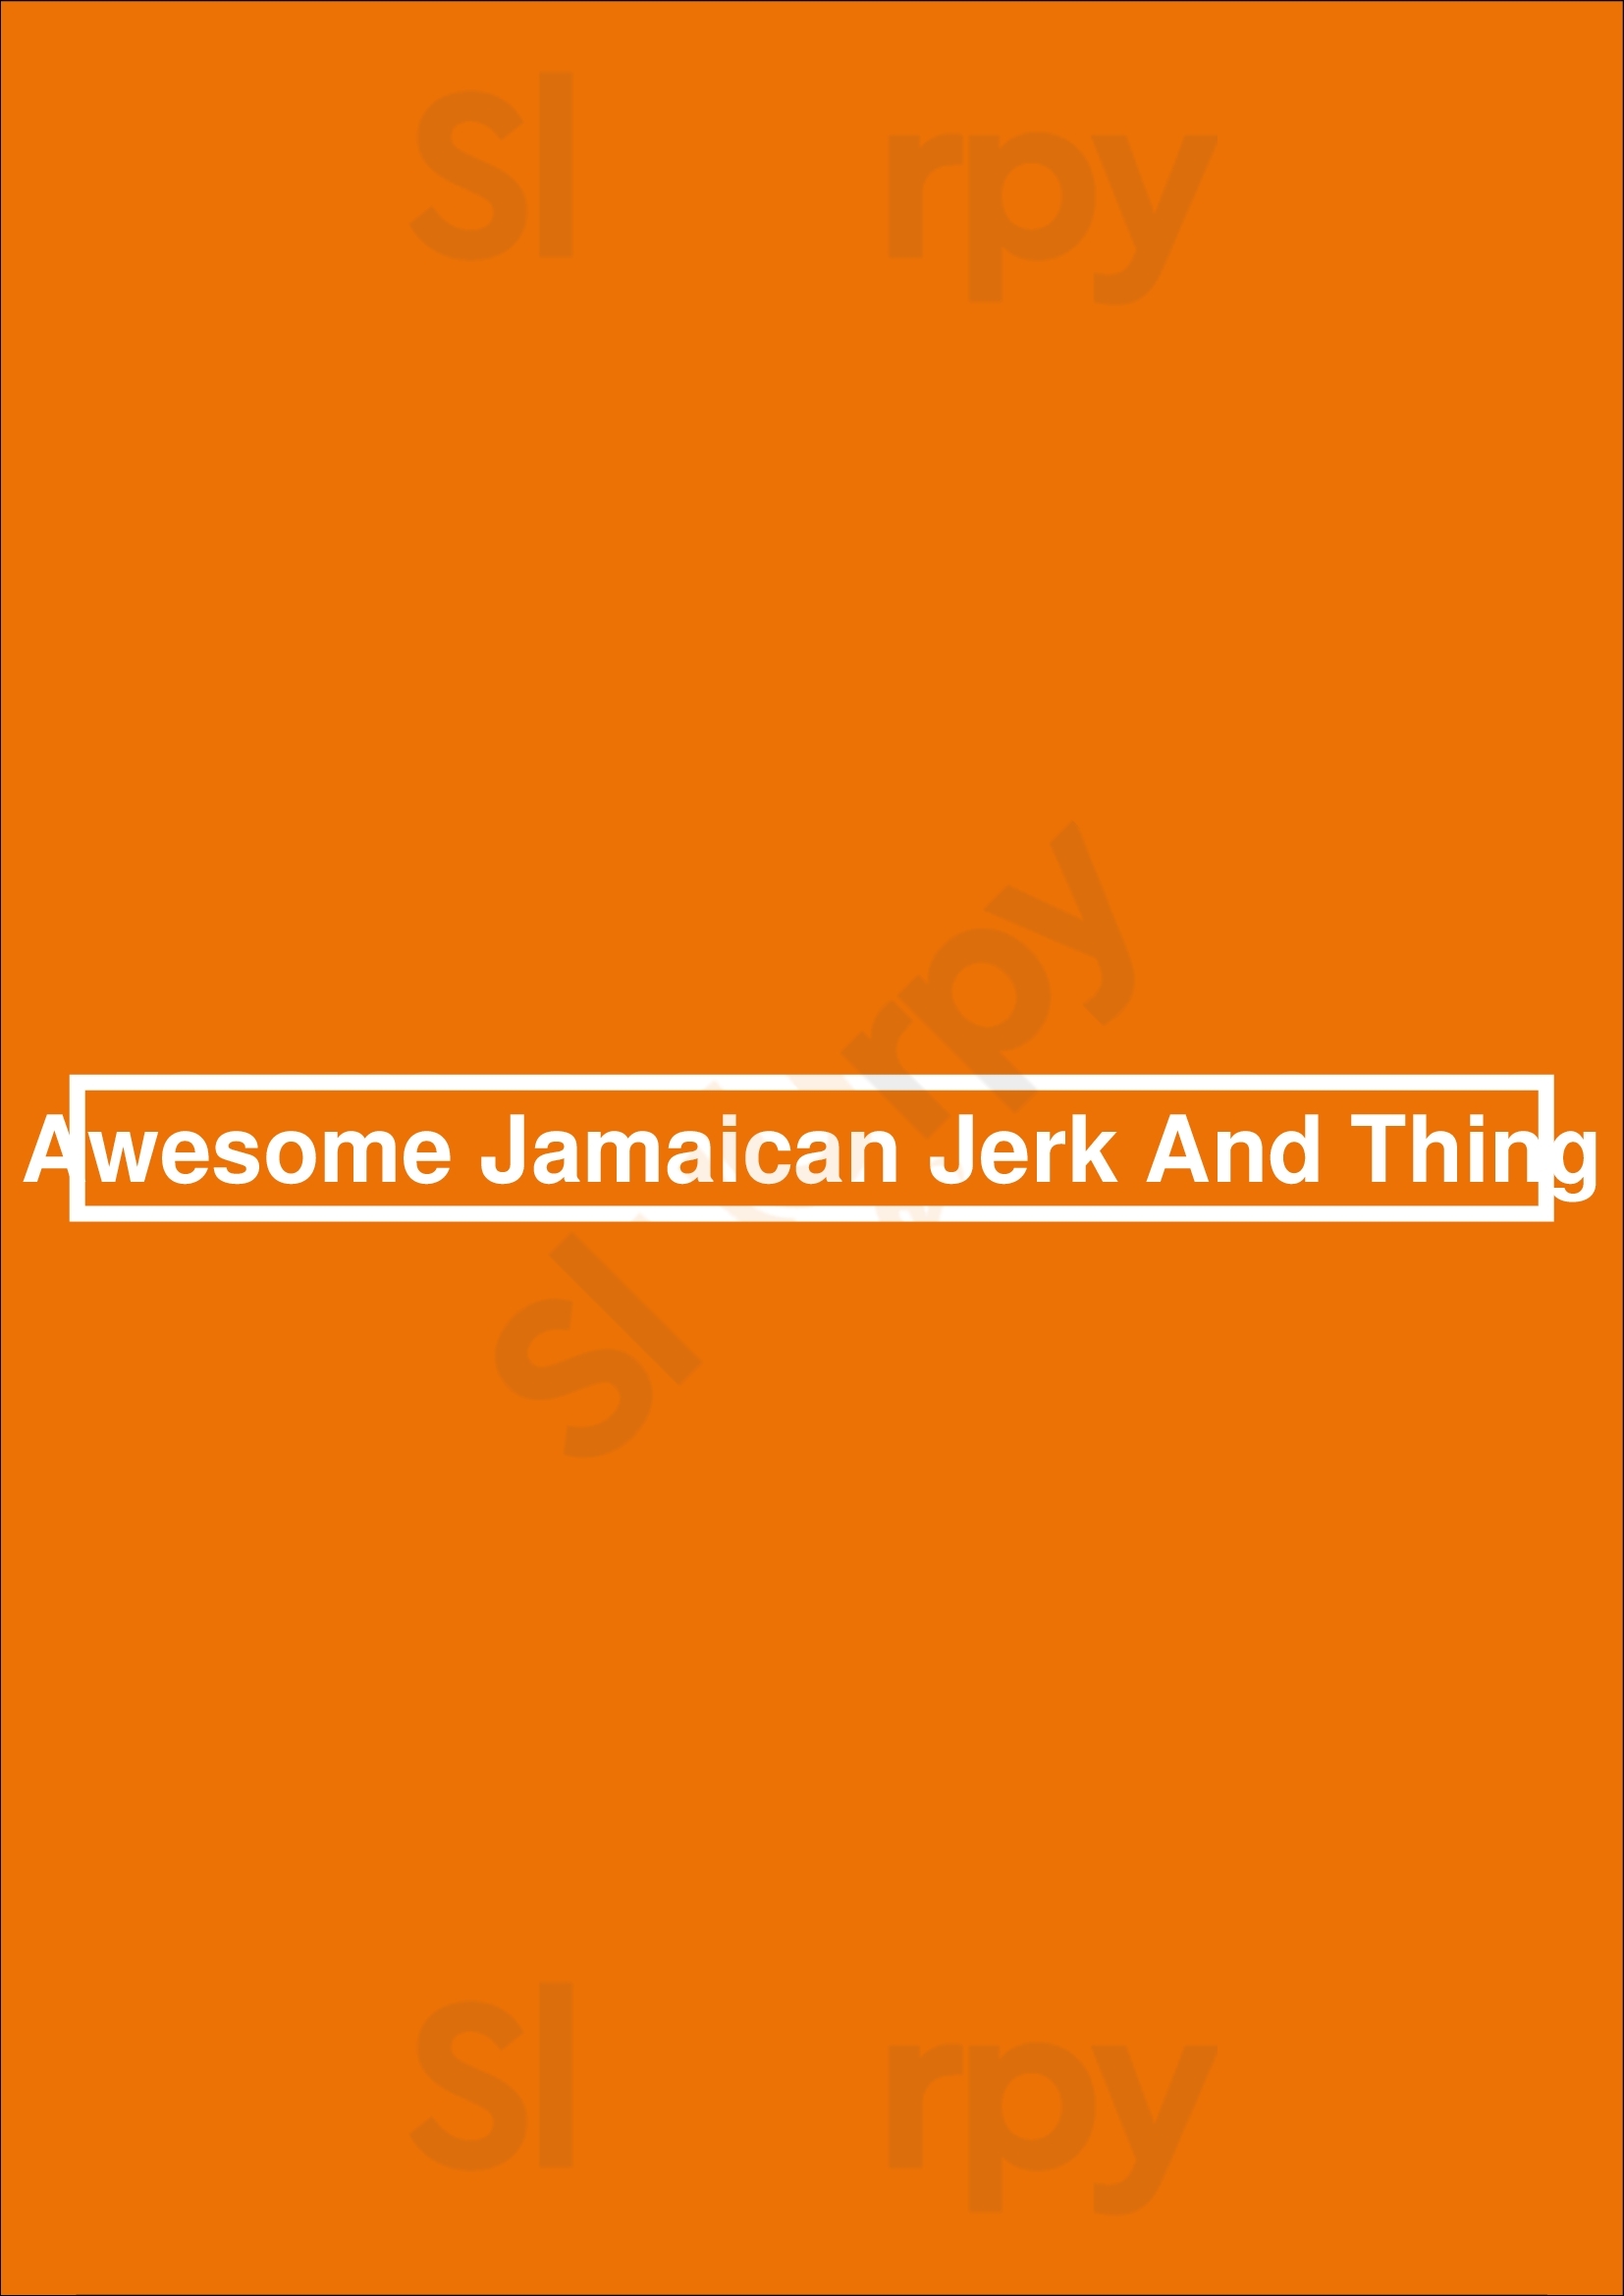 Awesome Jamaican Jerk And Thing Melbourne Menu - 1